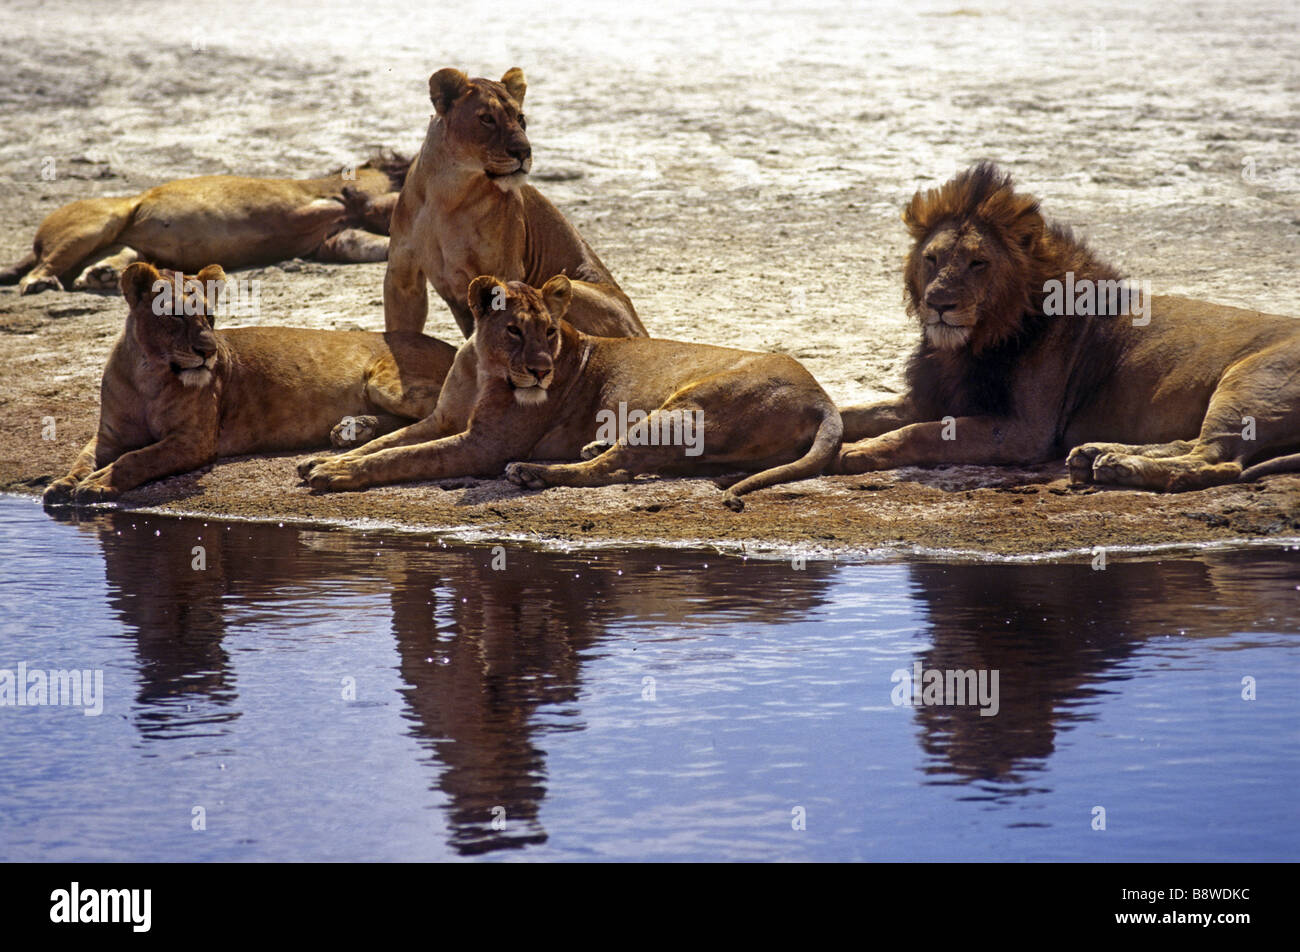 Three alert lionesses and a lion sitting at the edge of a pool with their reflections Ngorongoro Crater Tanzania East Africa Stock Photo